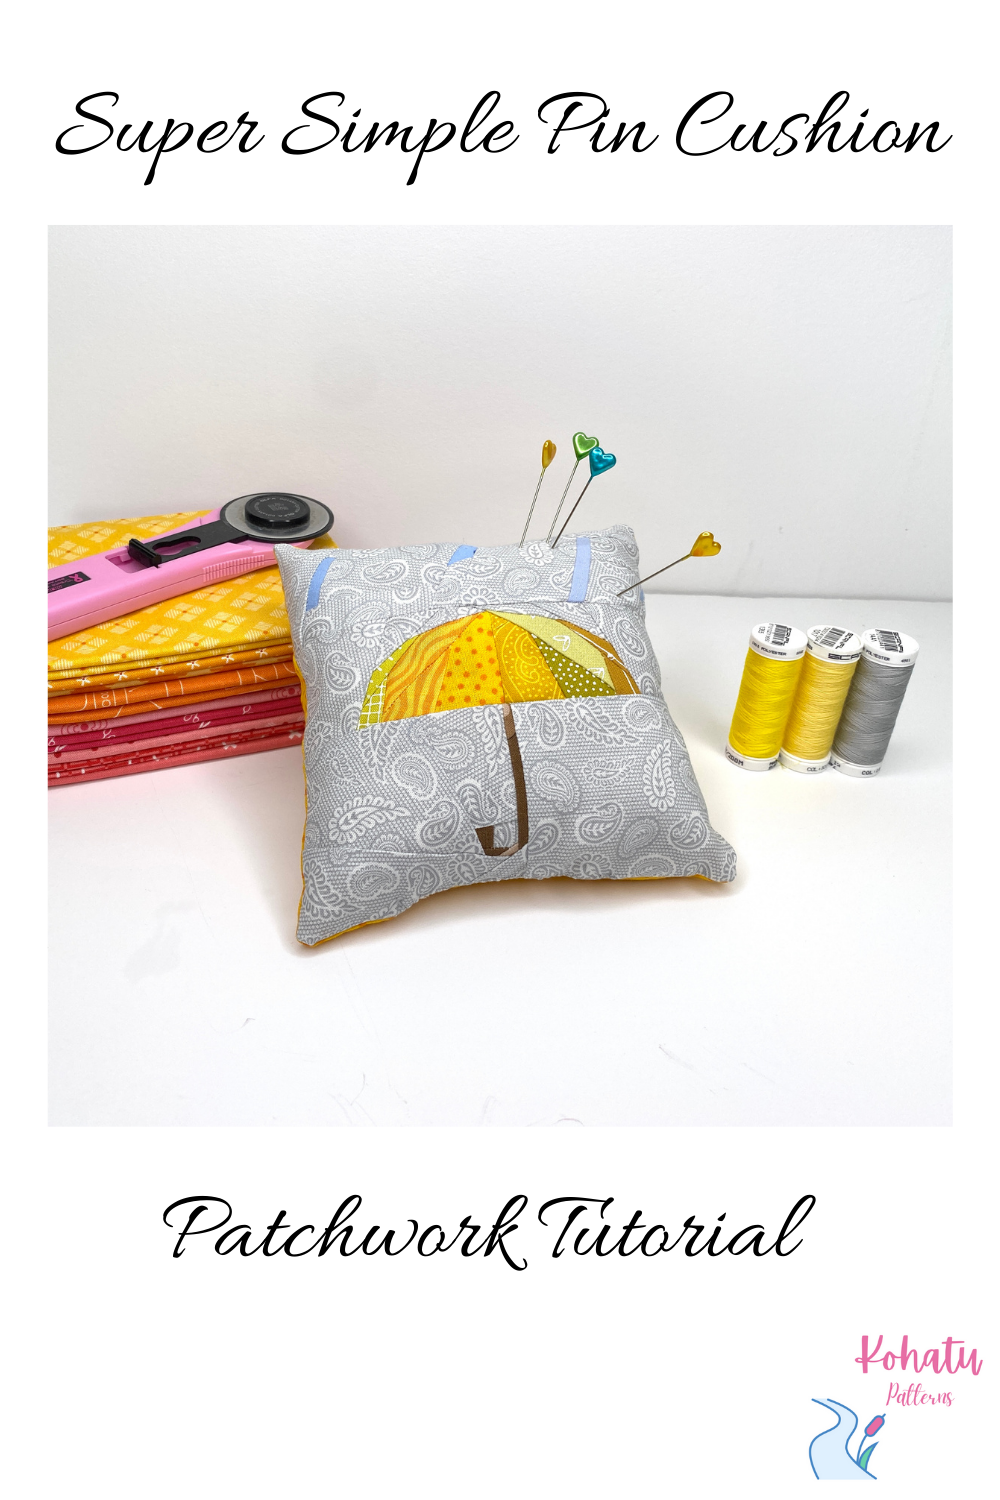 Patchwork Tutorial to turn a Scrappy Umbrella Paper Pieced quilt block into a Pin Cushion. Simple Sewing tutorial to make your own pin cushion. Patchwork sewing lesson.